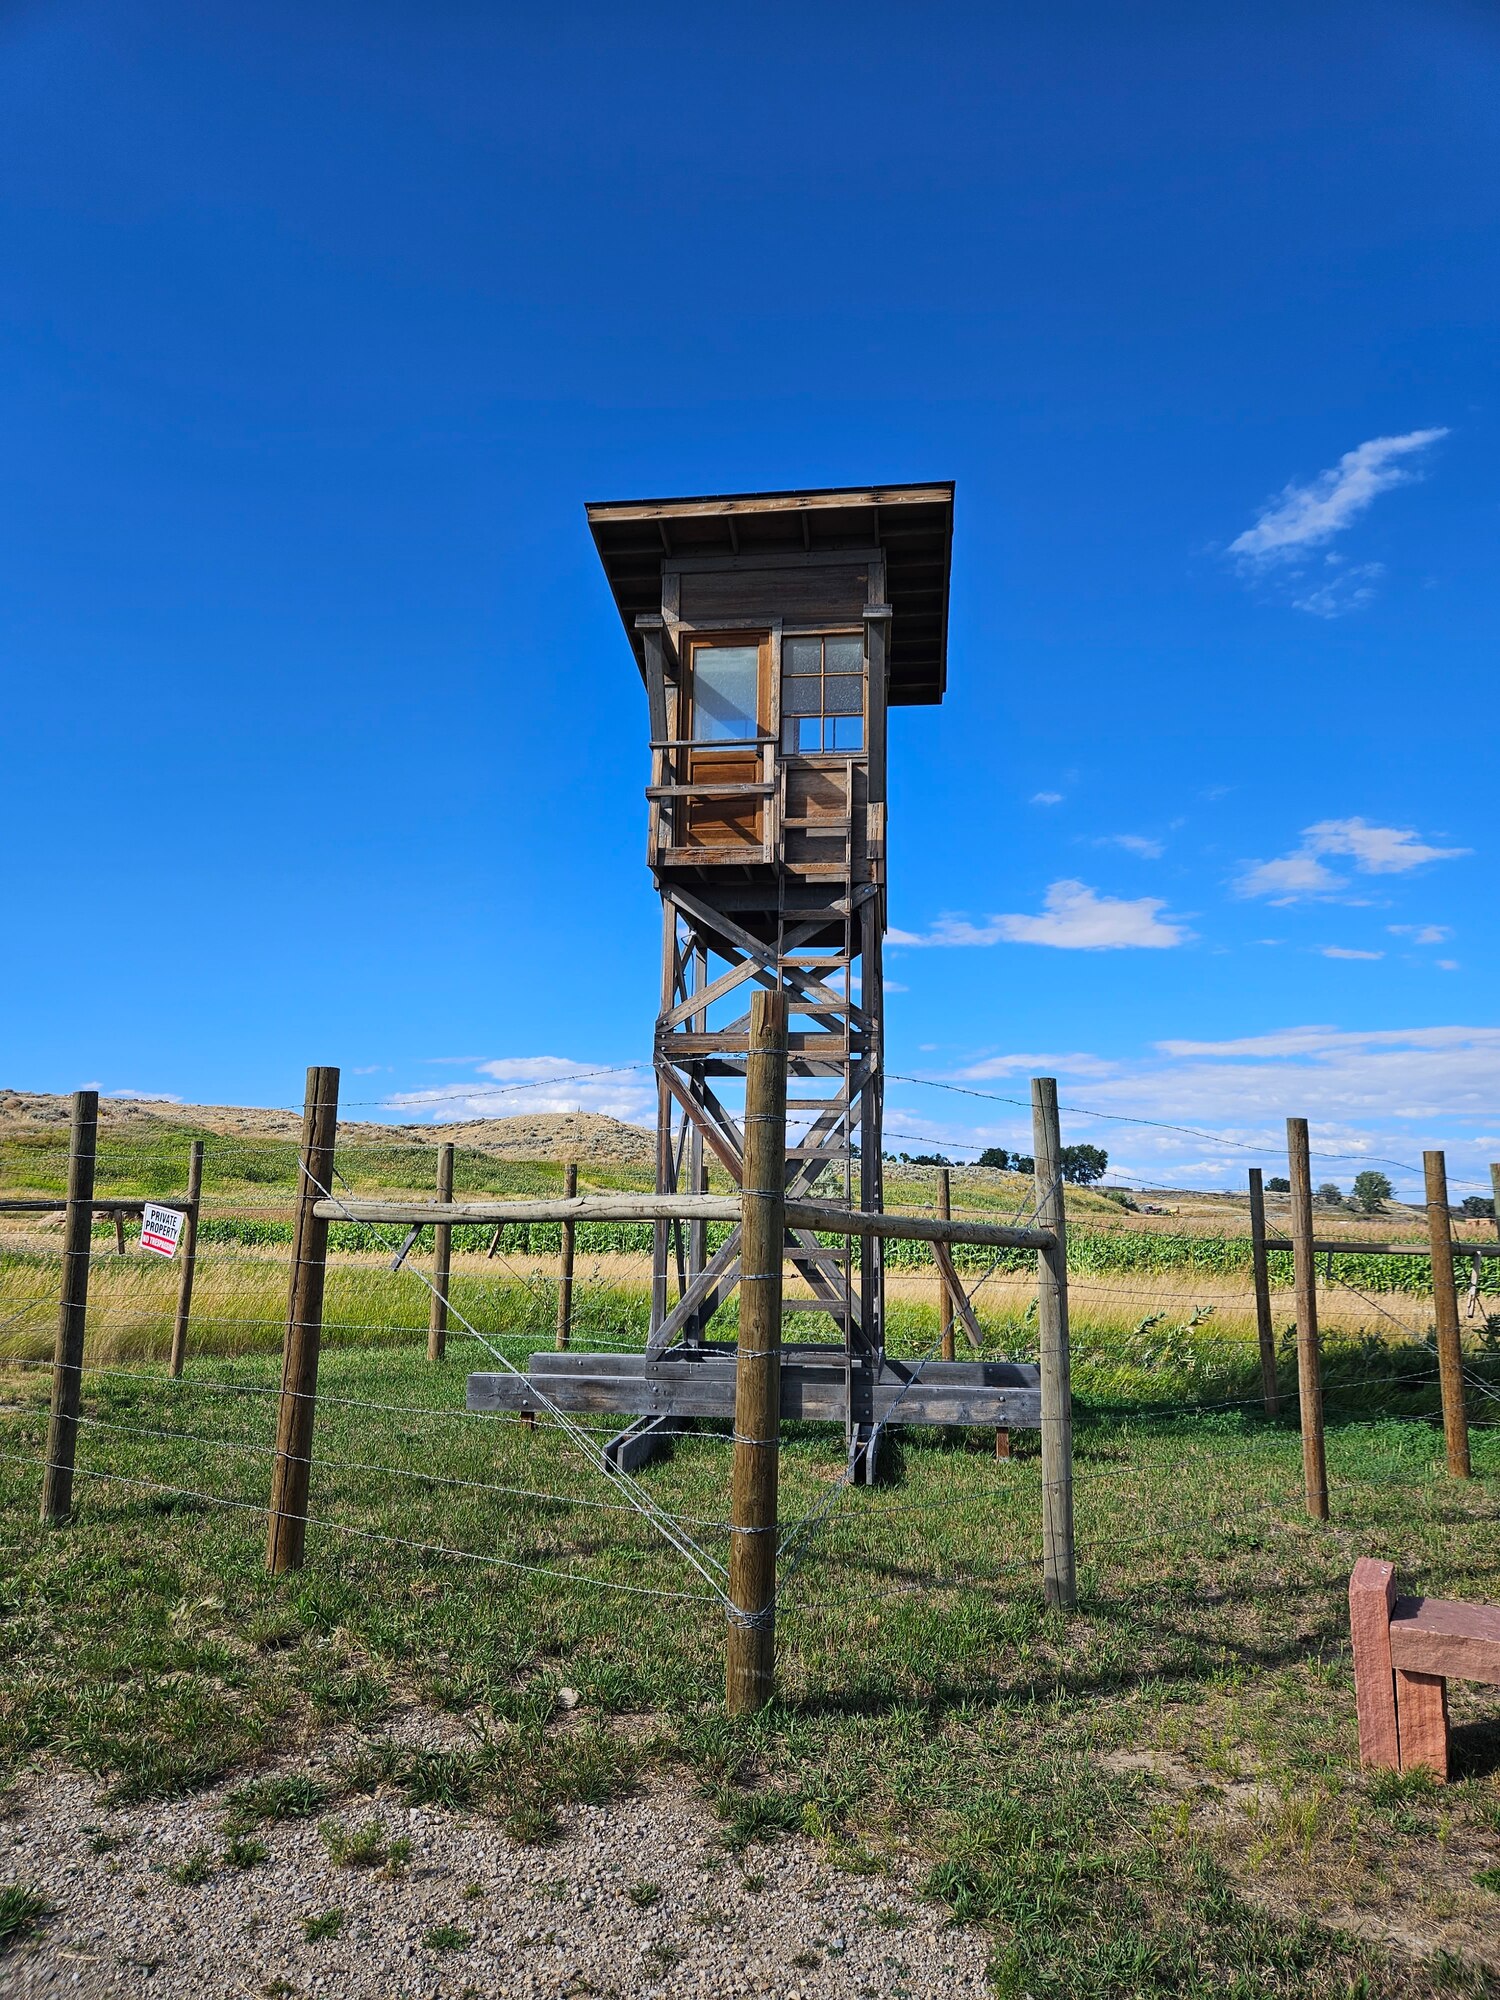 guard tower looming high in the photo over the Heart Mountain internment camp